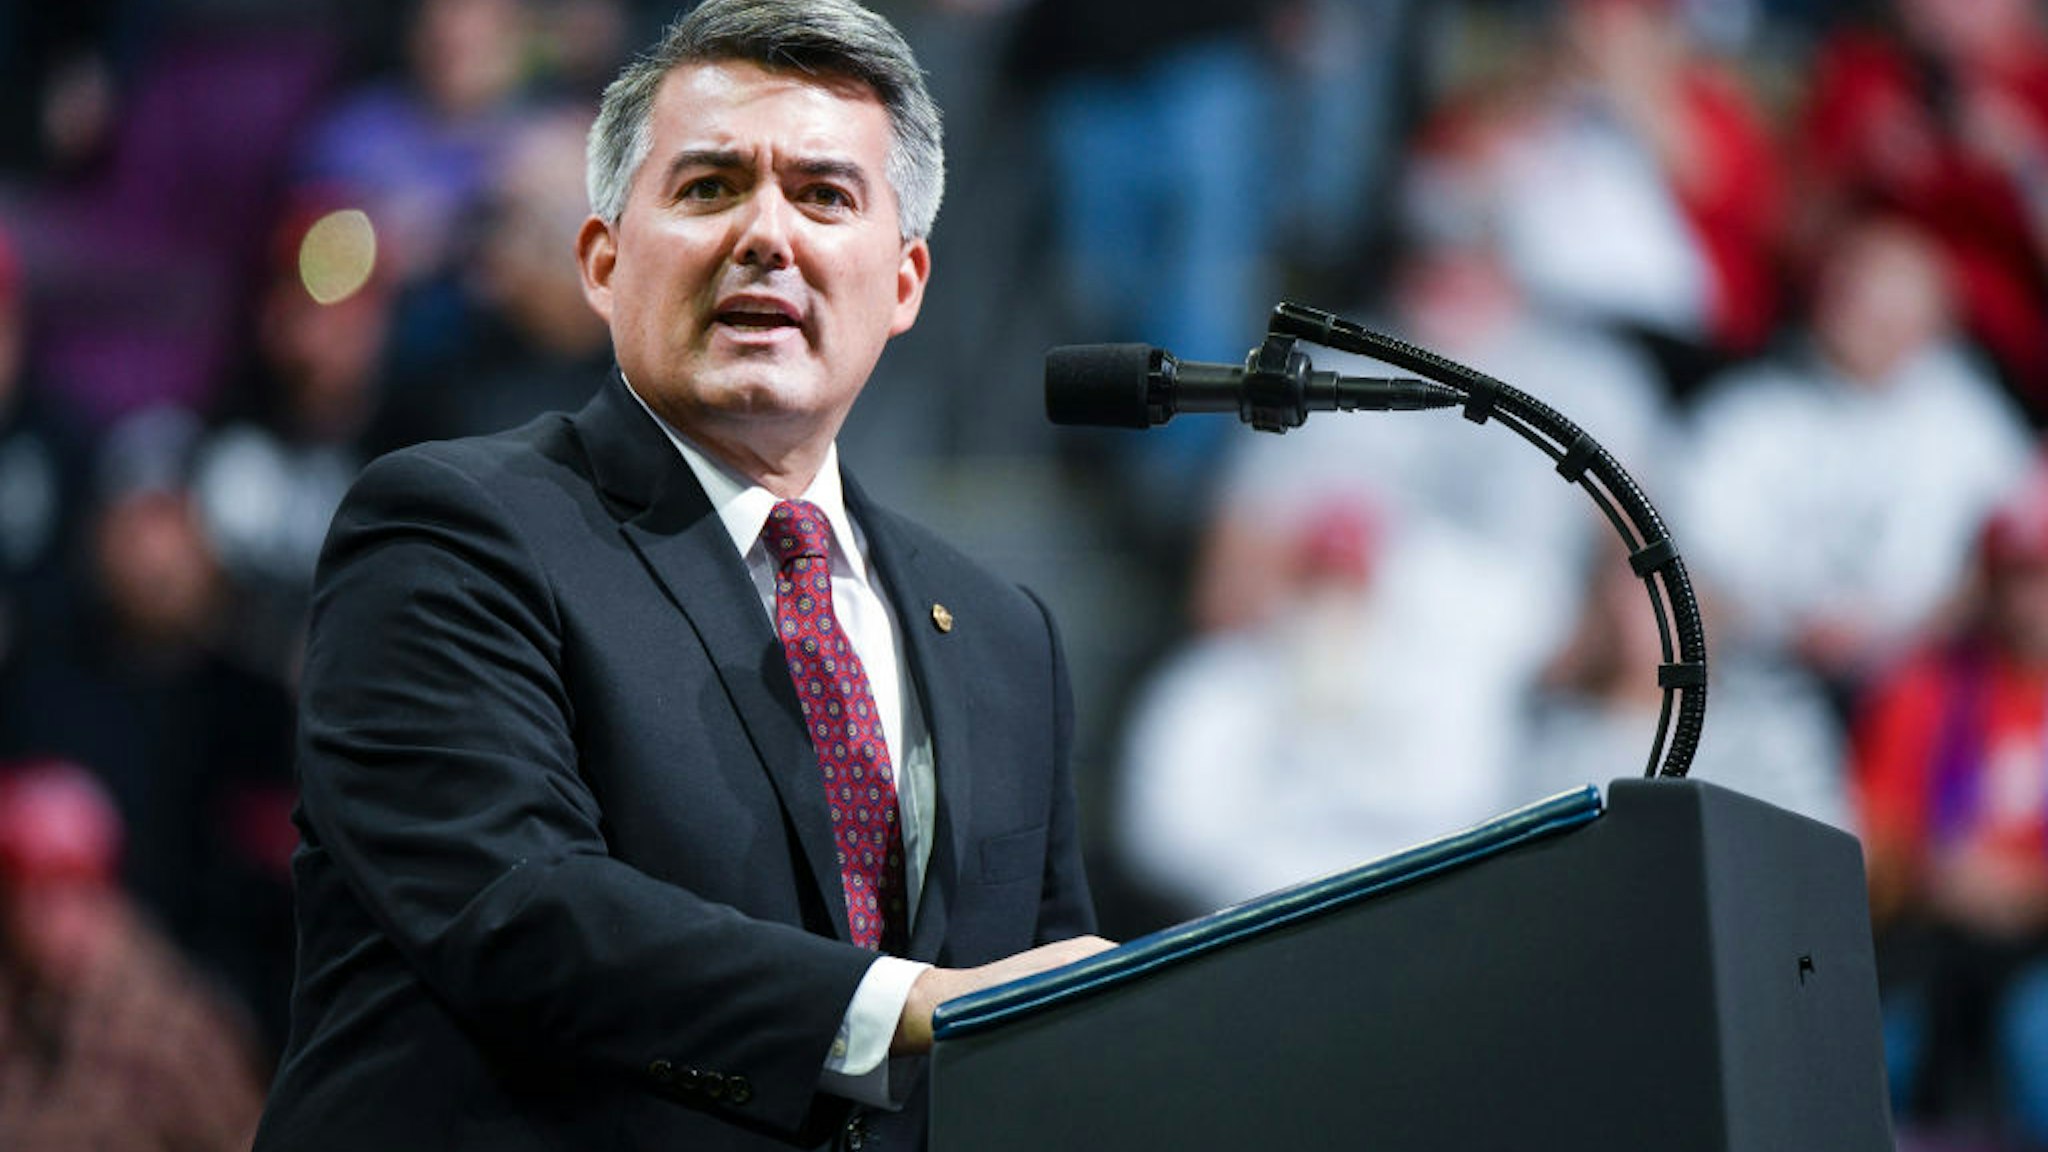 U.S. Sen. Cory Gardner (R-CO) speaks before the arrival of President Donald Trump at a Keep America Great rally on February 20, 2020 in Colorado Springs, Colorado.